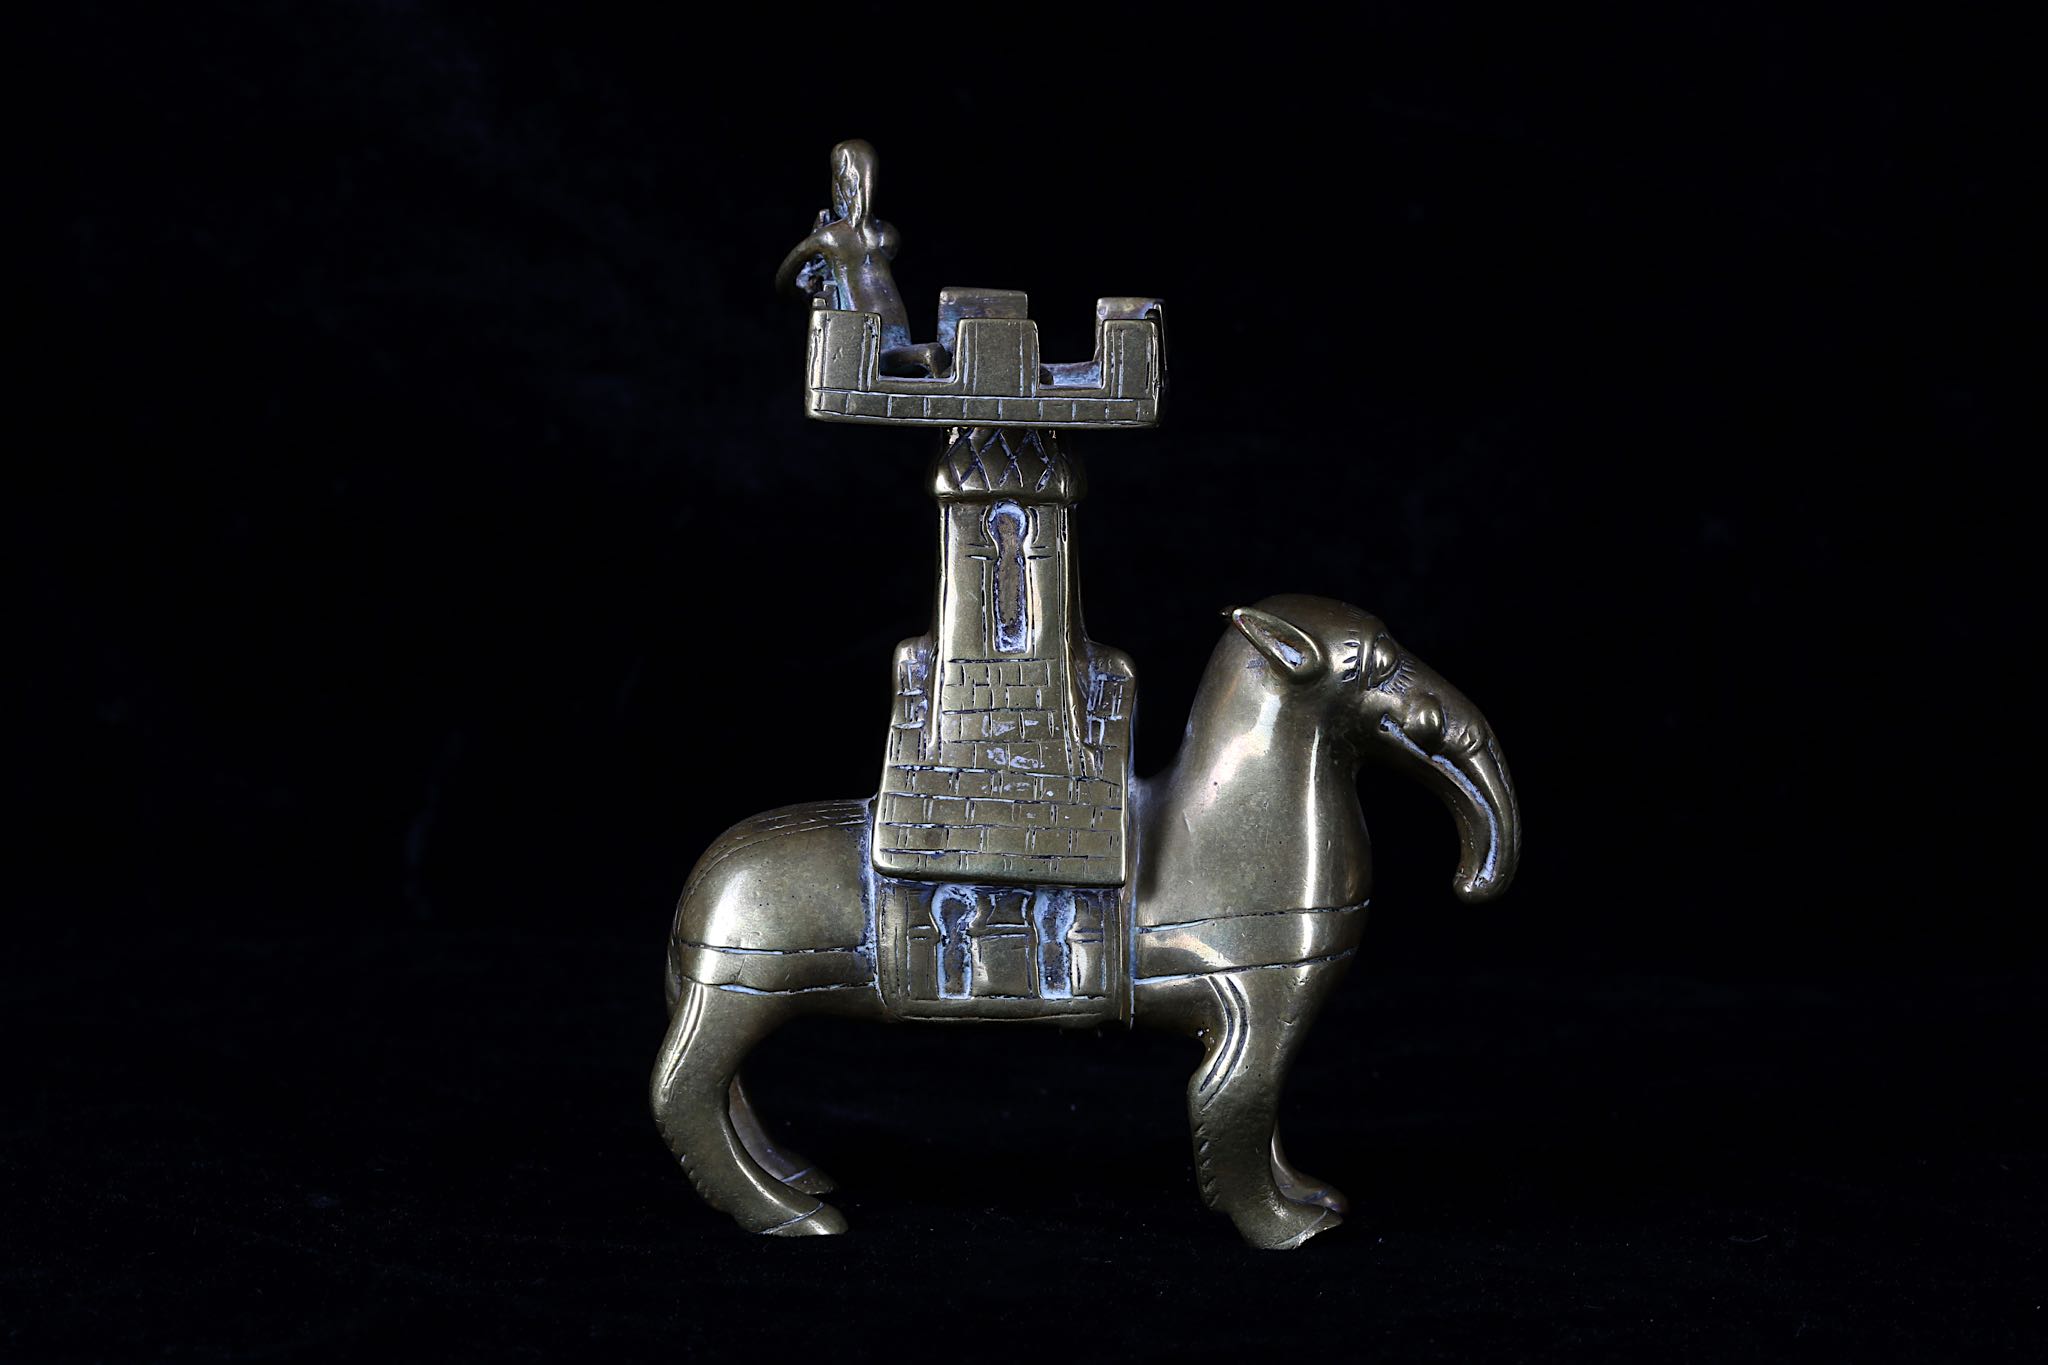 A MAGDEBURG STYLE BRONZE CANDLESTICK IN THE FORM OF AN ELEPHANT AND CASTLE, PROBABLY 19TH CENTURY - Image 3 of 8